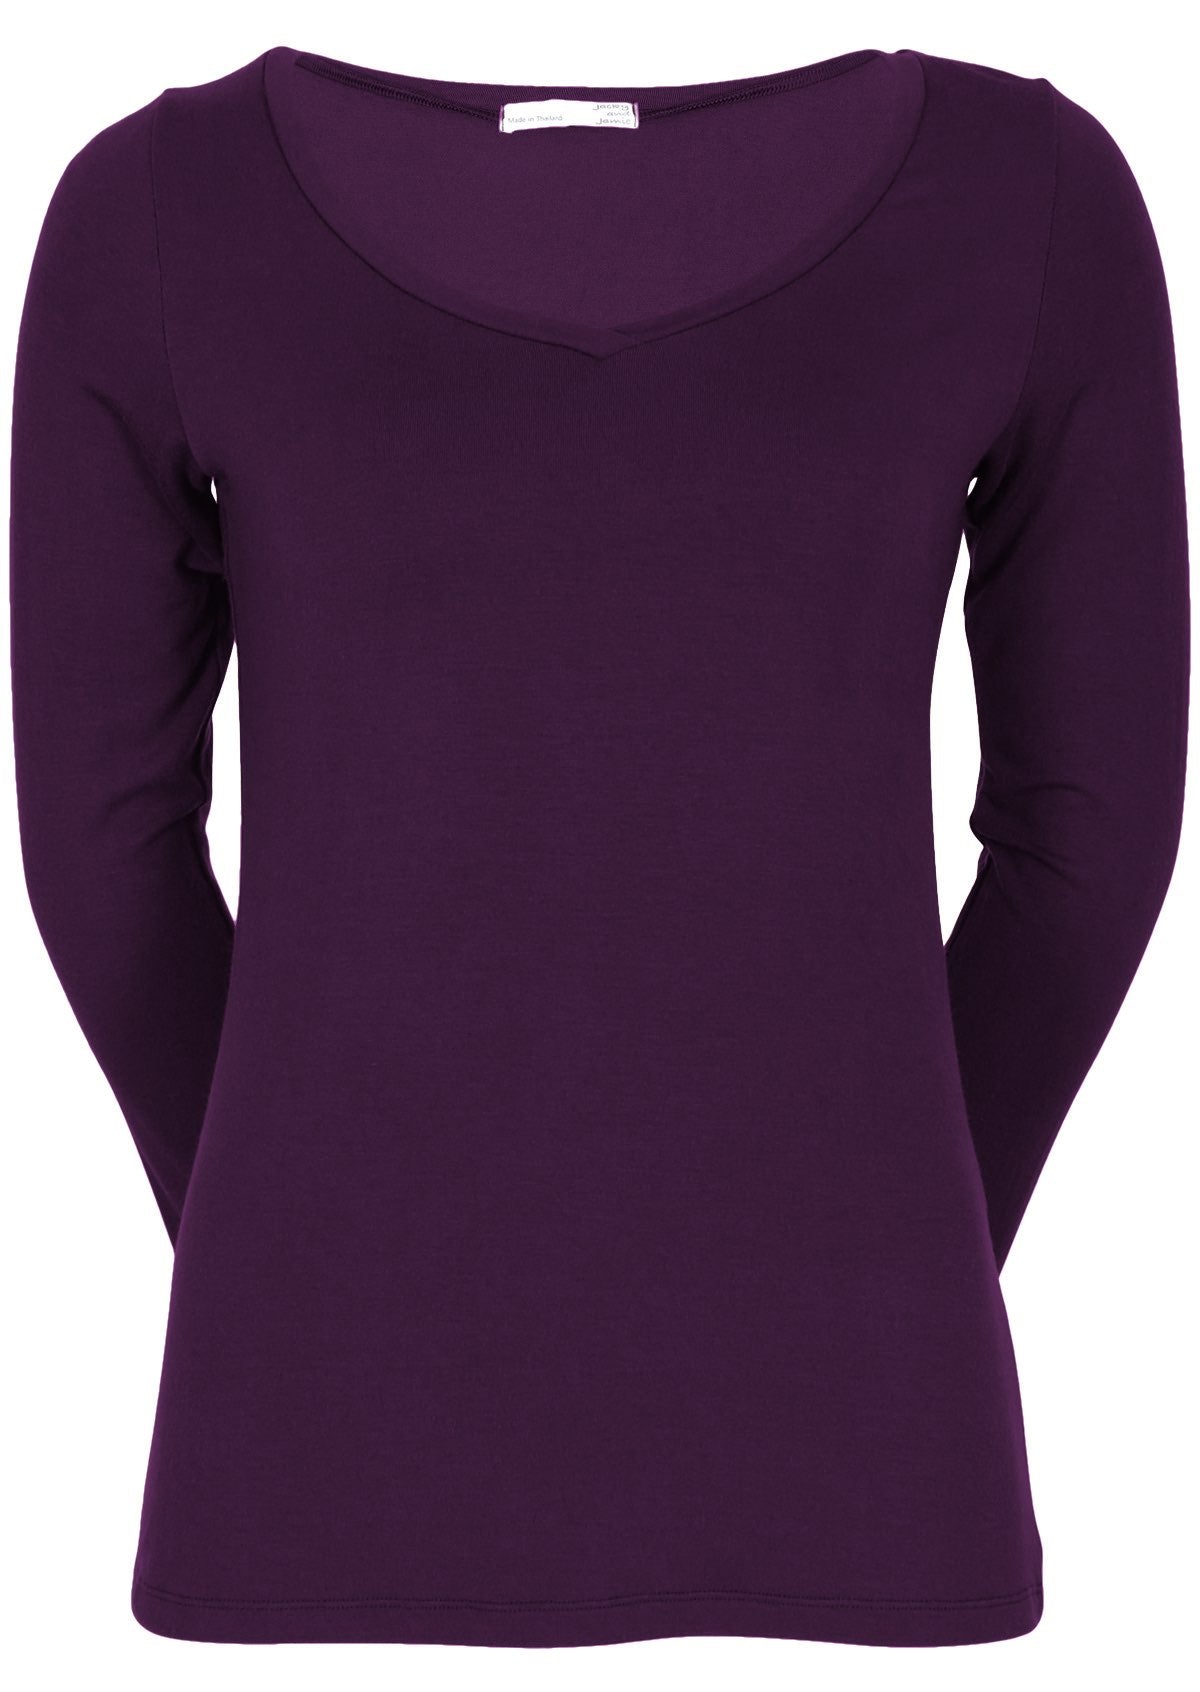 Front view of women's purple long sleeve stretch v-neck soft rayon top.